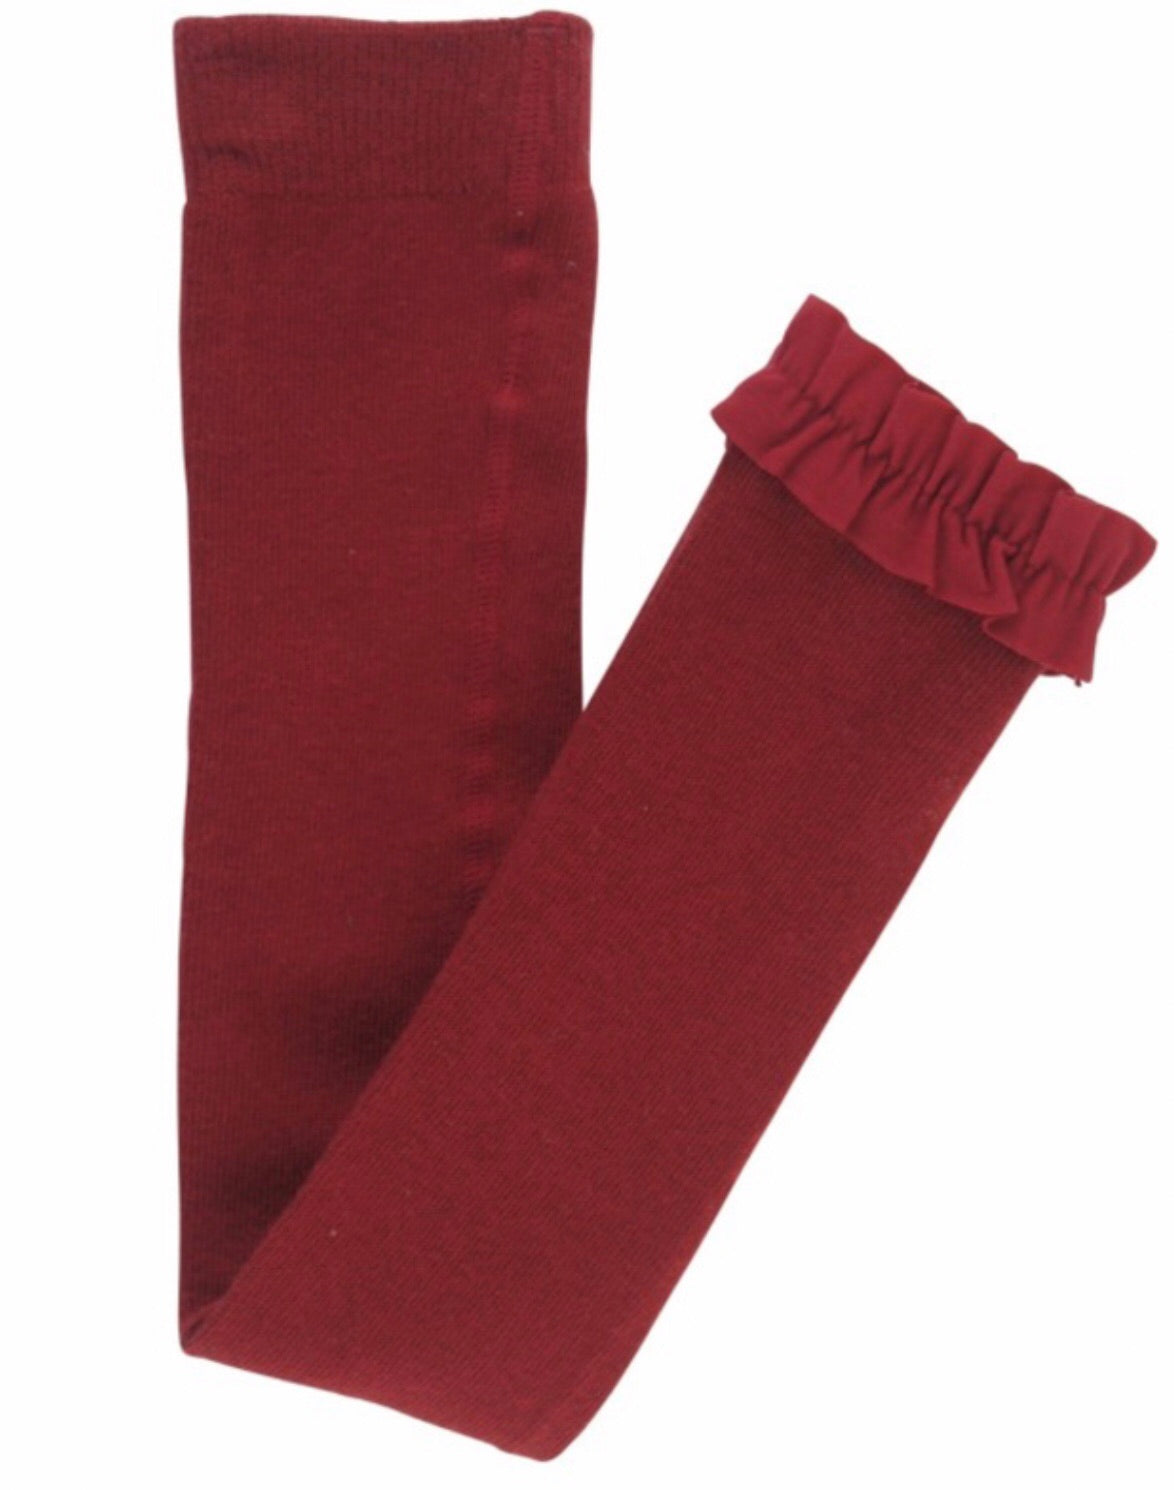 Footless Ruffle Tights in Cranberry 12-24 months - Doodlebug's Children's Boutique